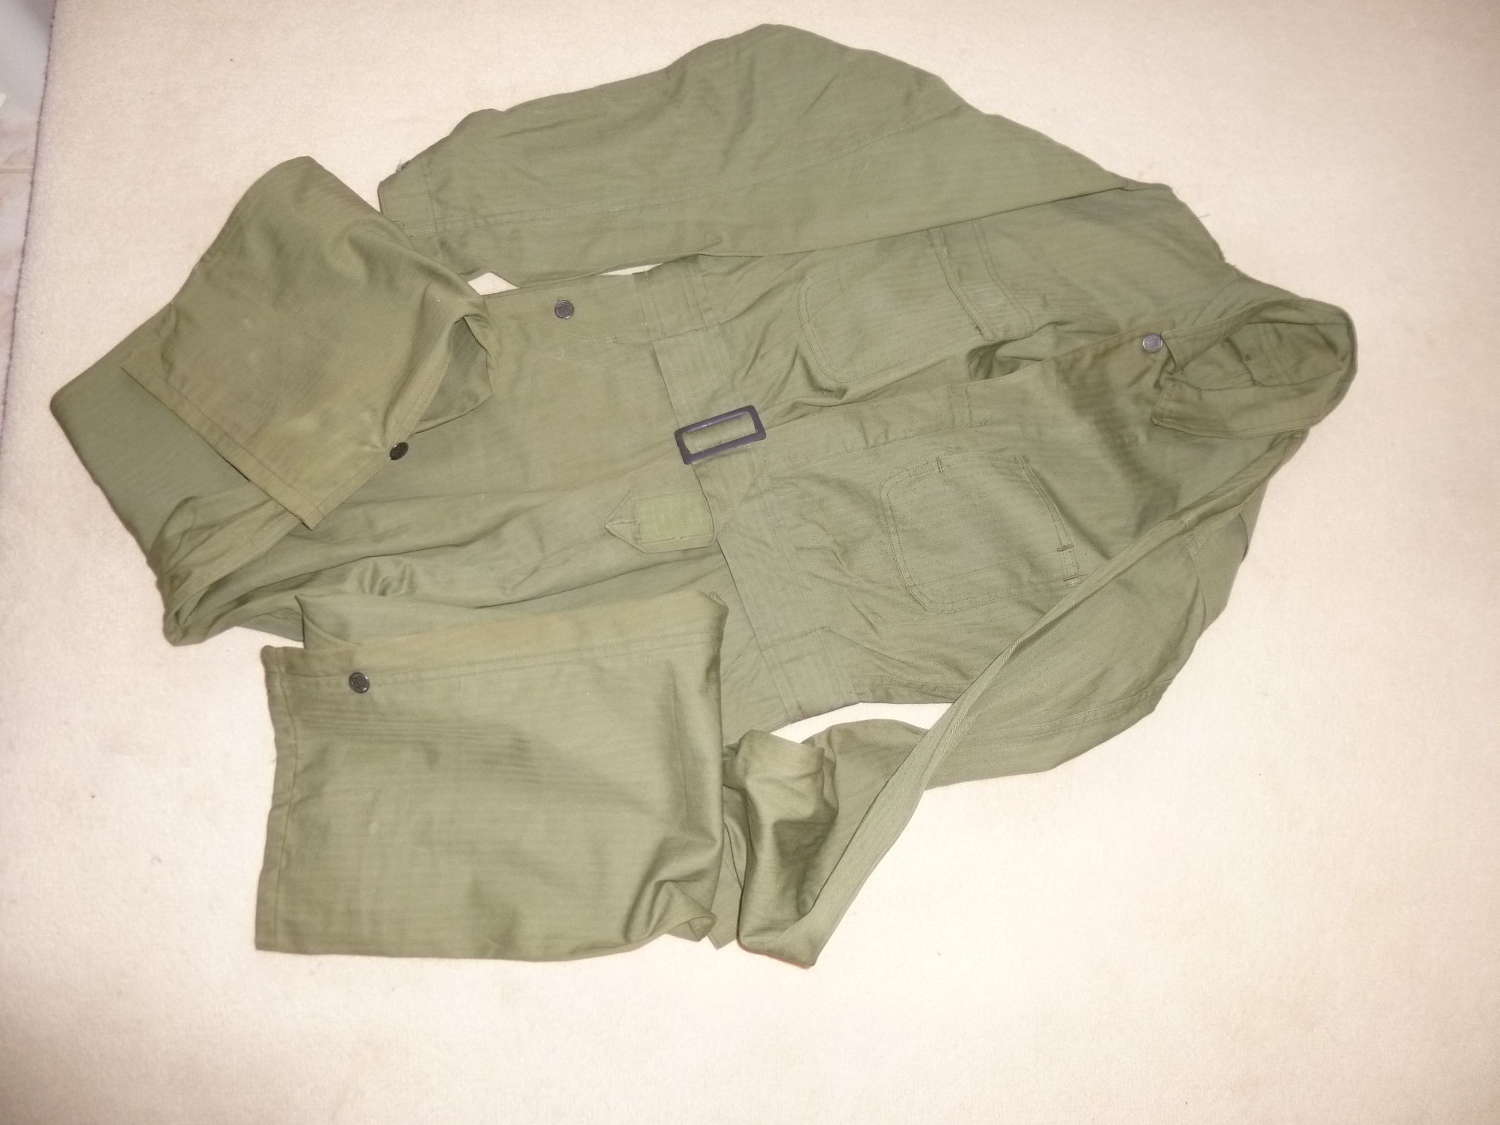 US Army HBT tanker's coveralls